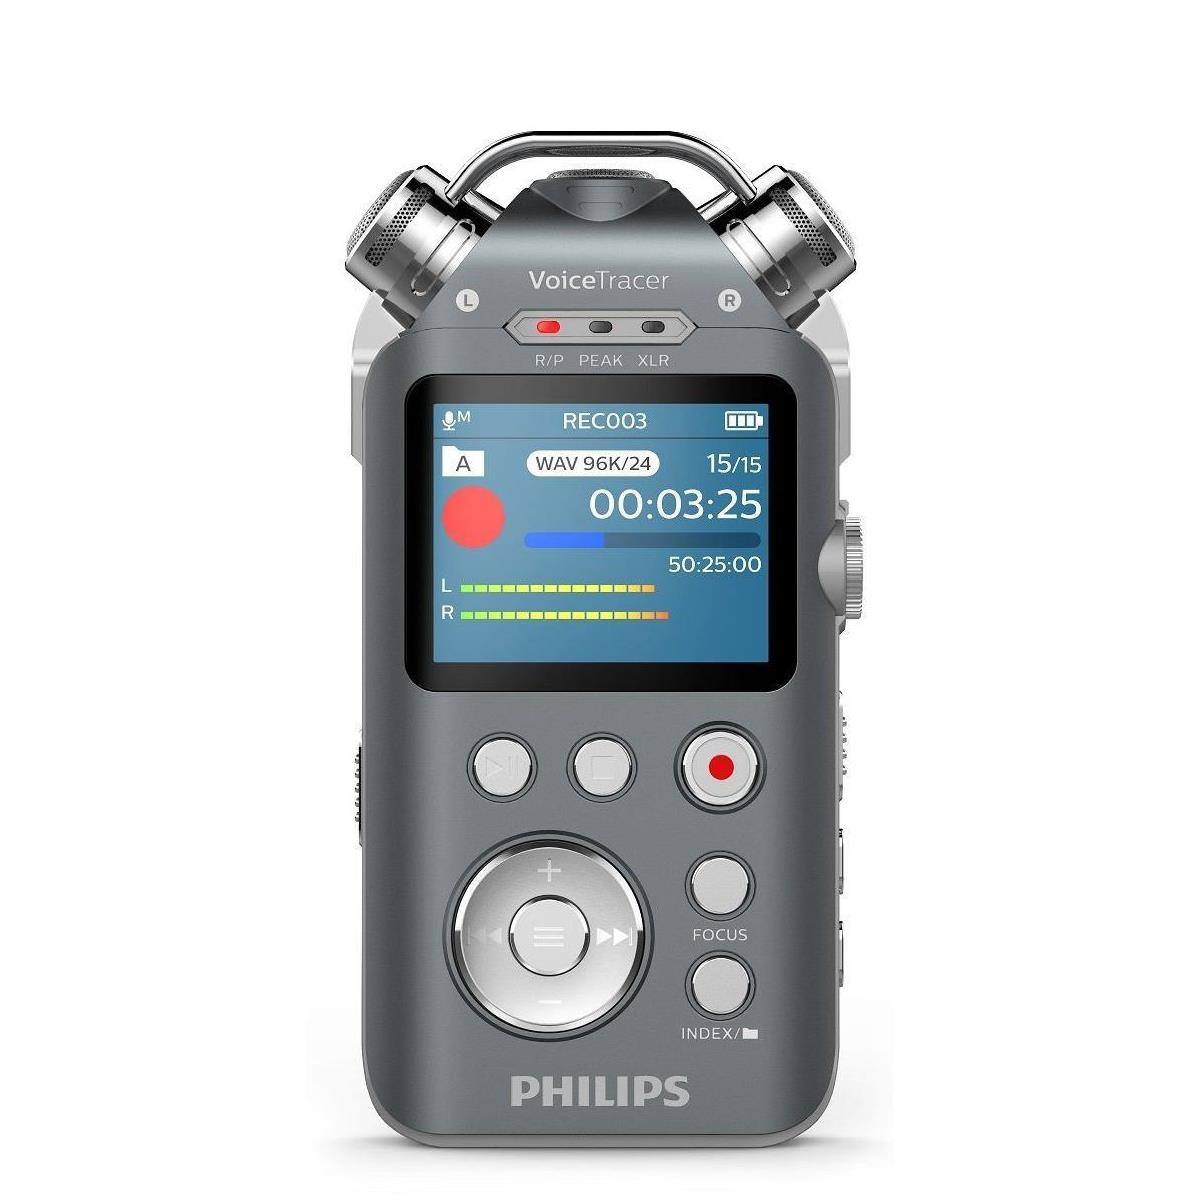 

Pag Philips Audio Philips VoiceTracer DVT7500 Audio Recorder